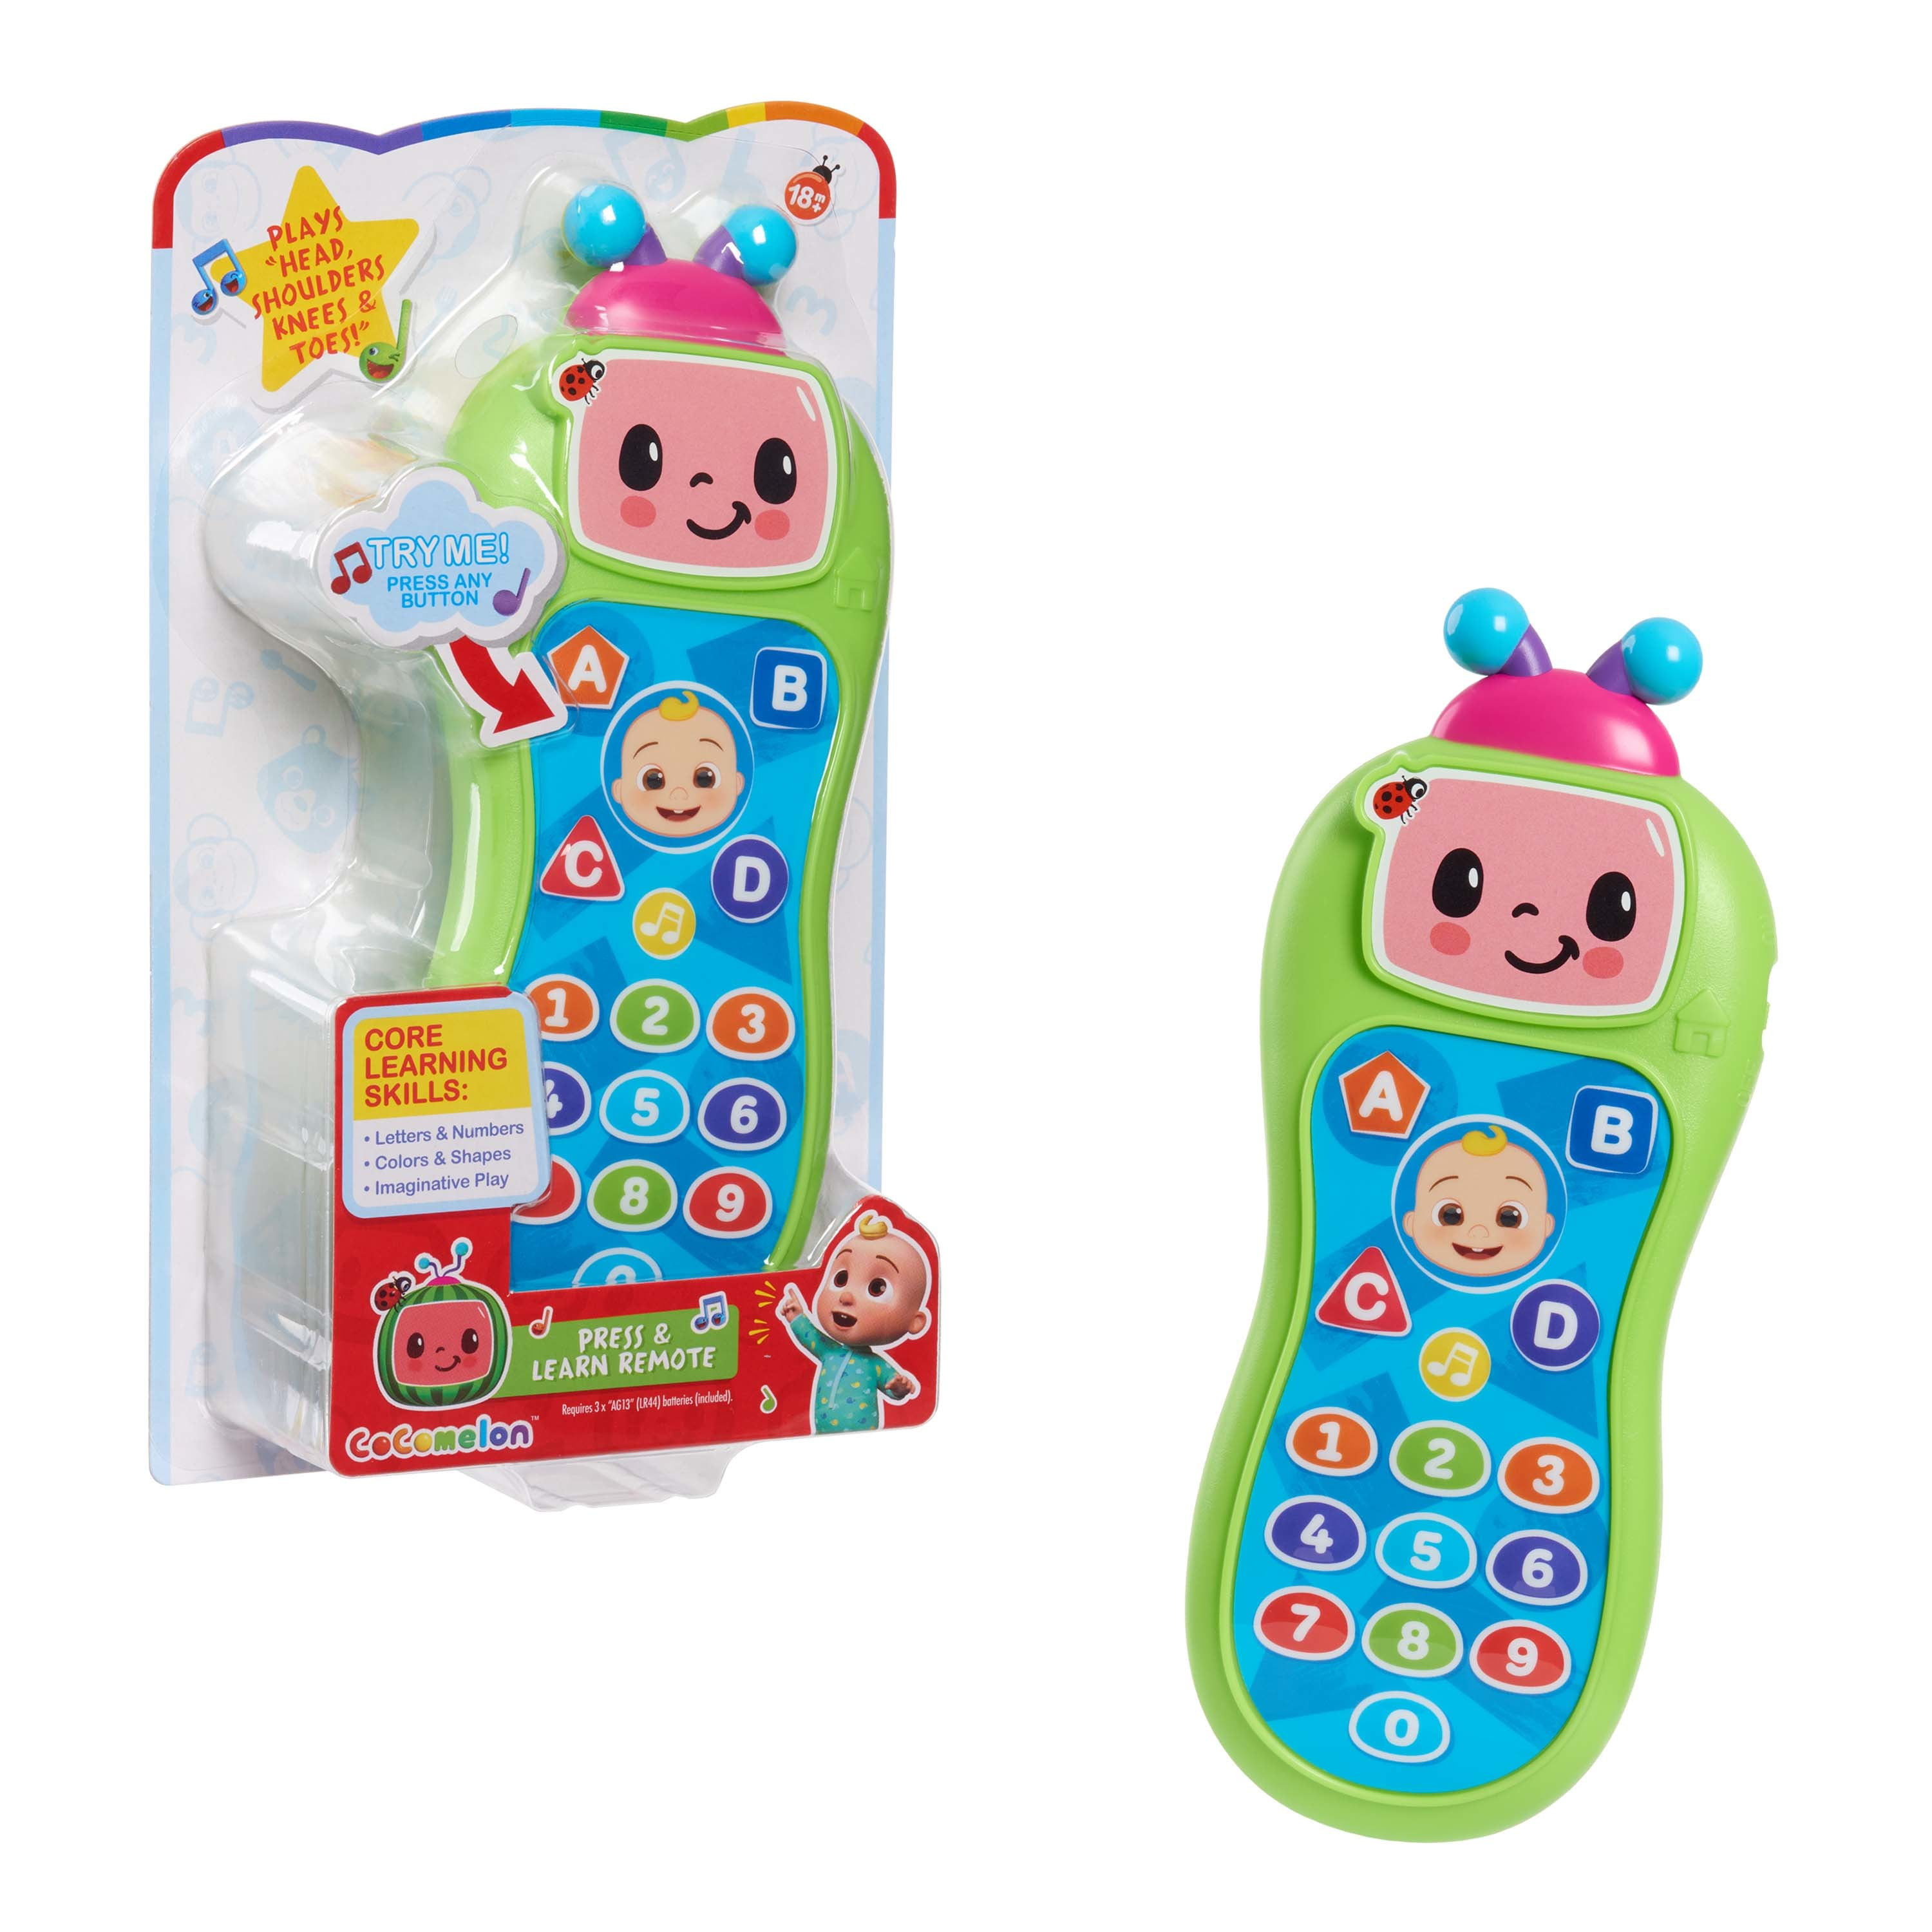 CoComelon Press and Learn Remote, Learning & Education, Officially Licensed Kids Toys for Ages 18 Month, Gifts and Presents